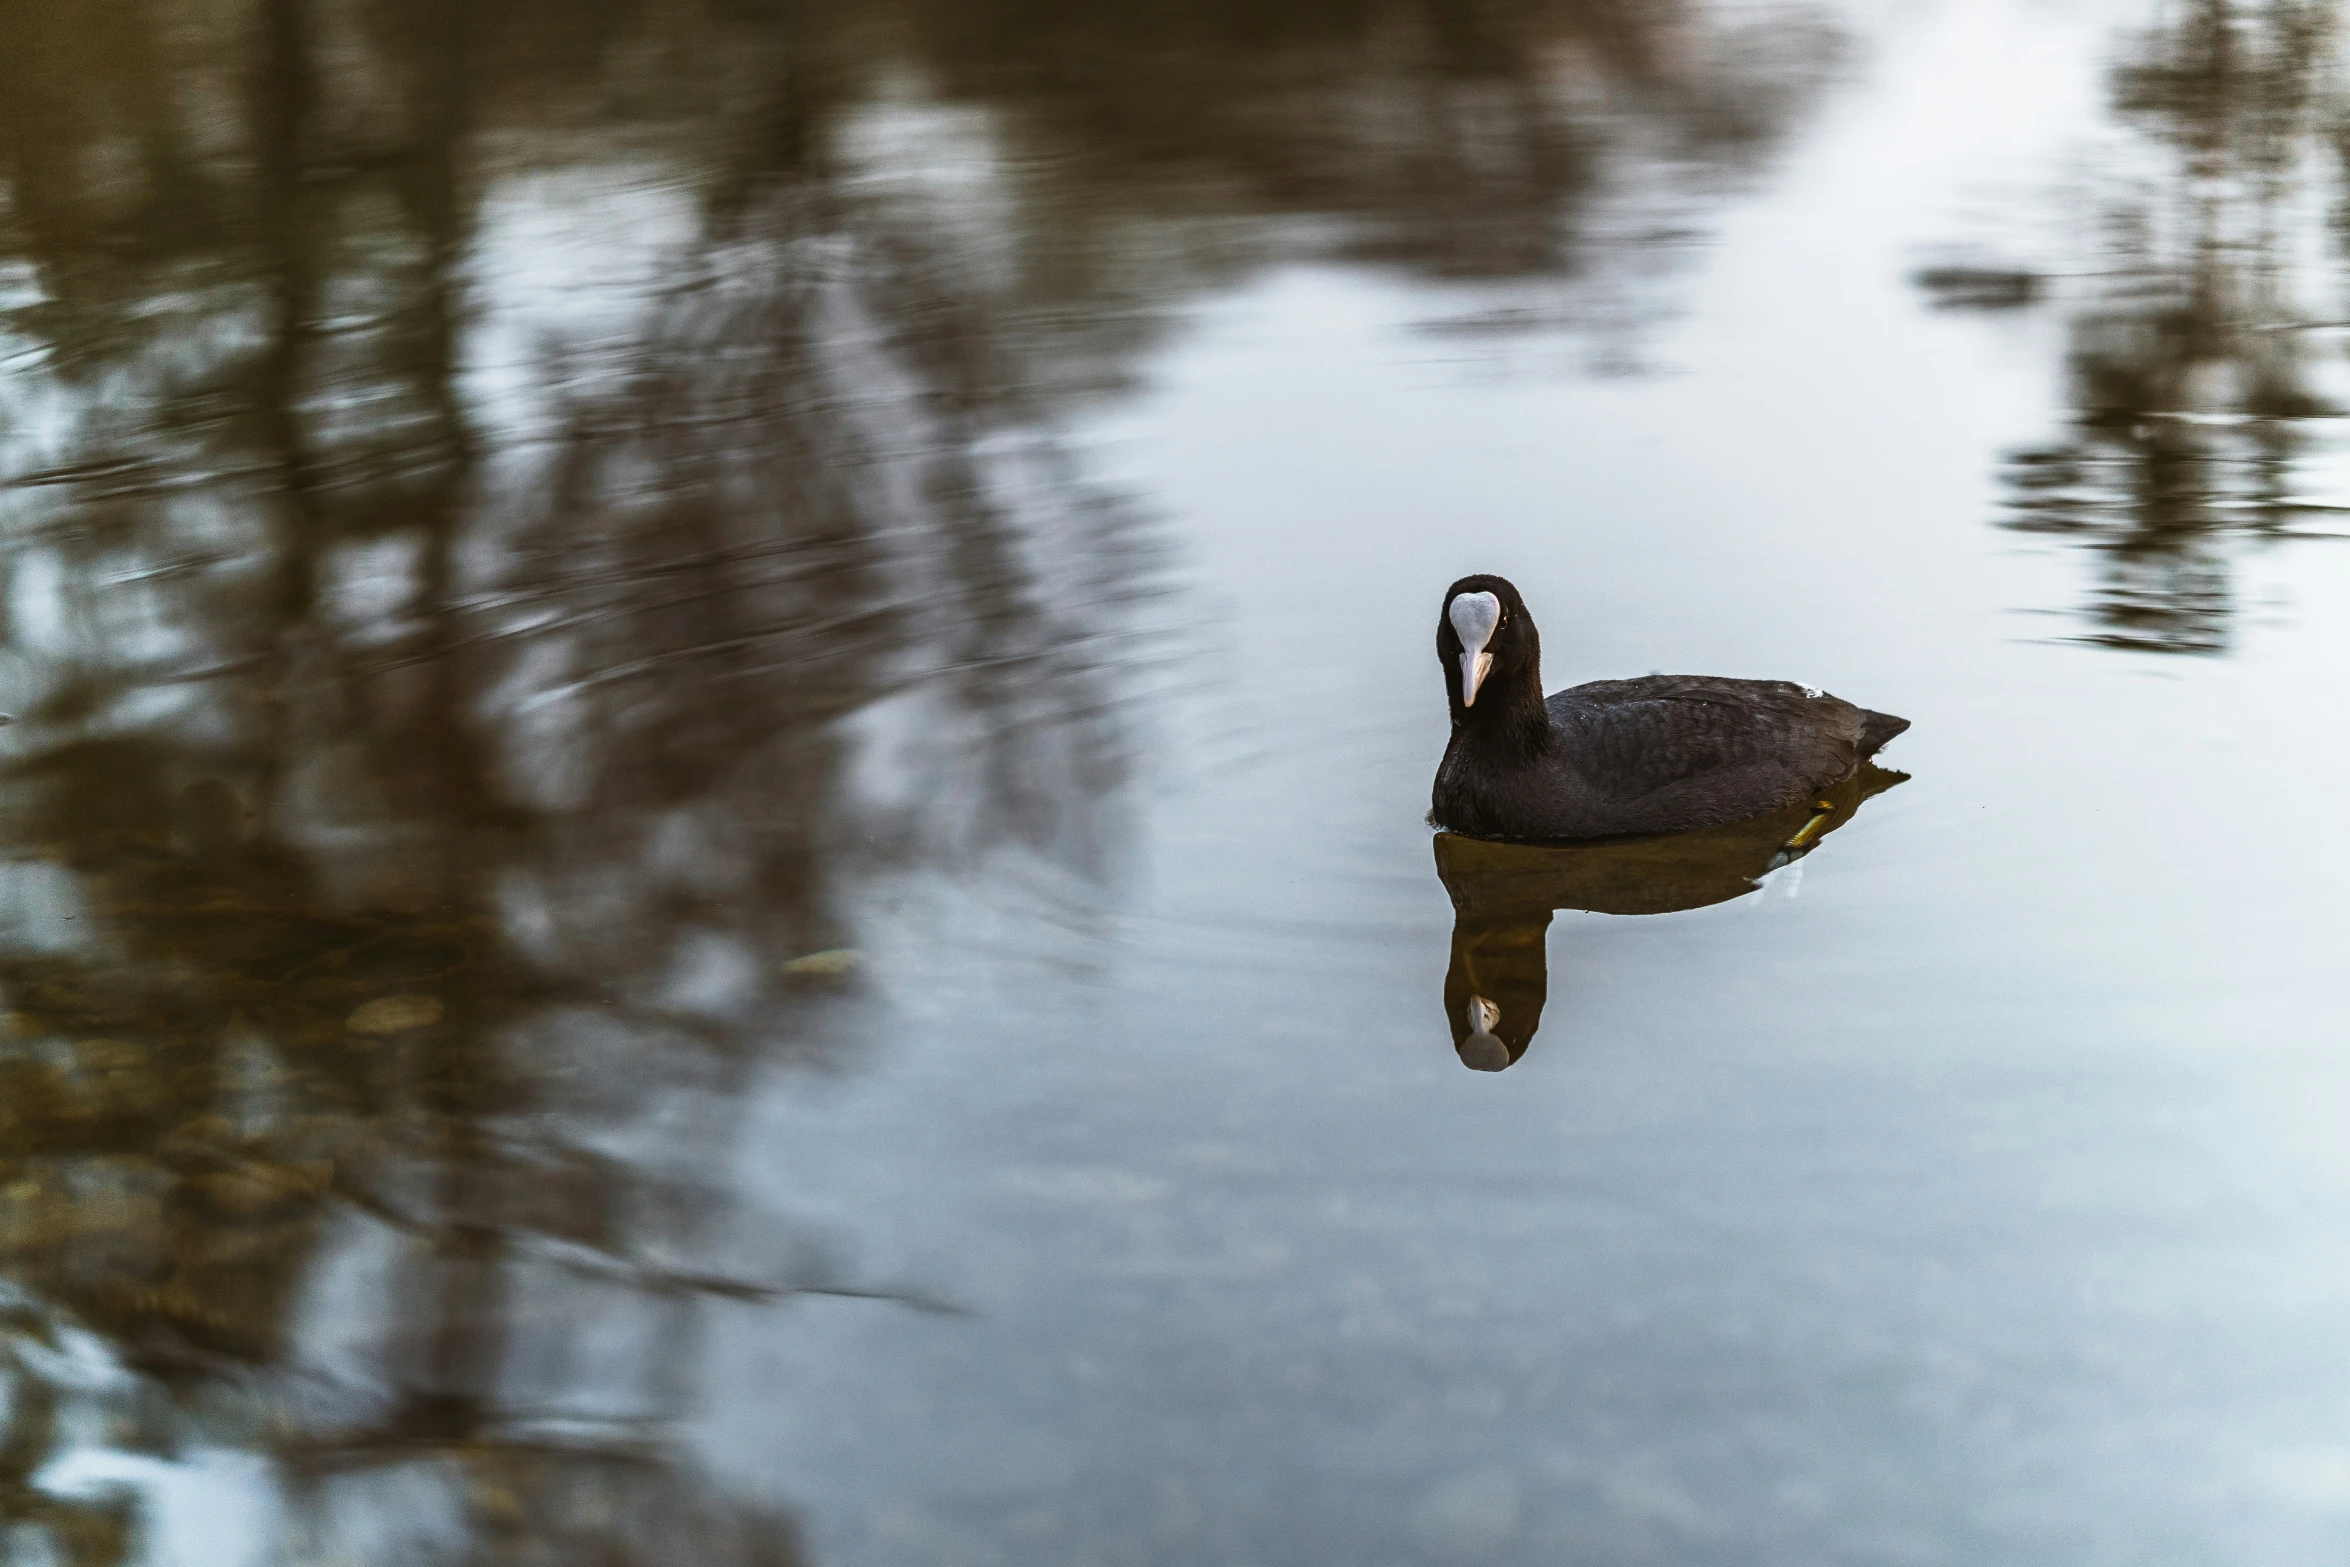 a black swan swims in the still water